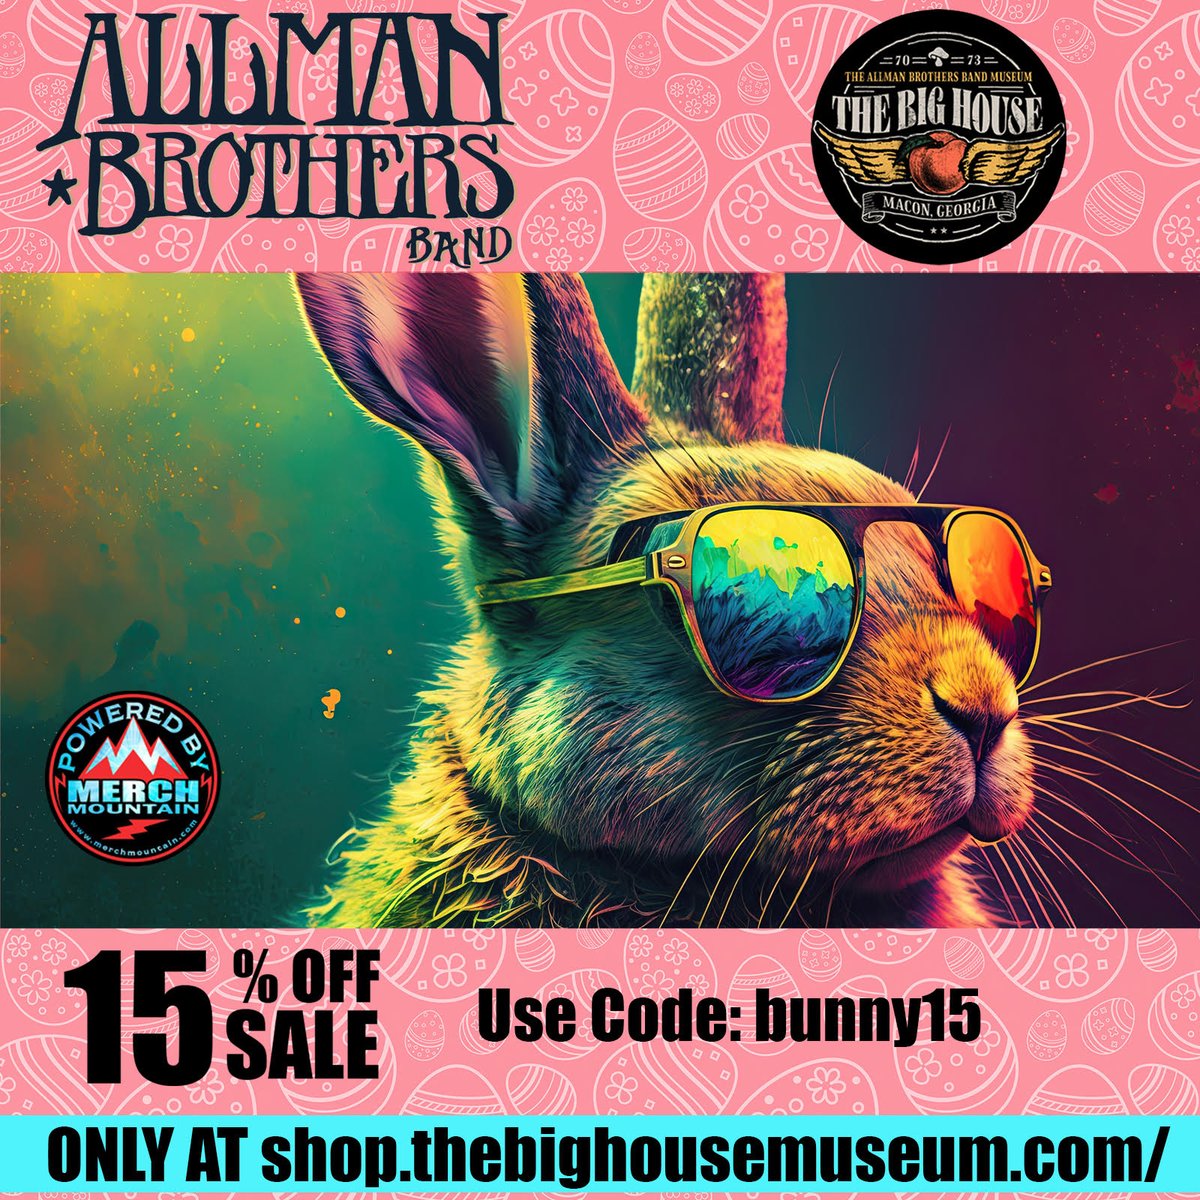 Get 15% off all Allman Brothers Band merch at the Big House Museum Gift Shop through April 1 with coupon code bunny15 ! It's a great time to get some cool ABB tees for the spring and summer concert season! buff.ly/3Te8ENR